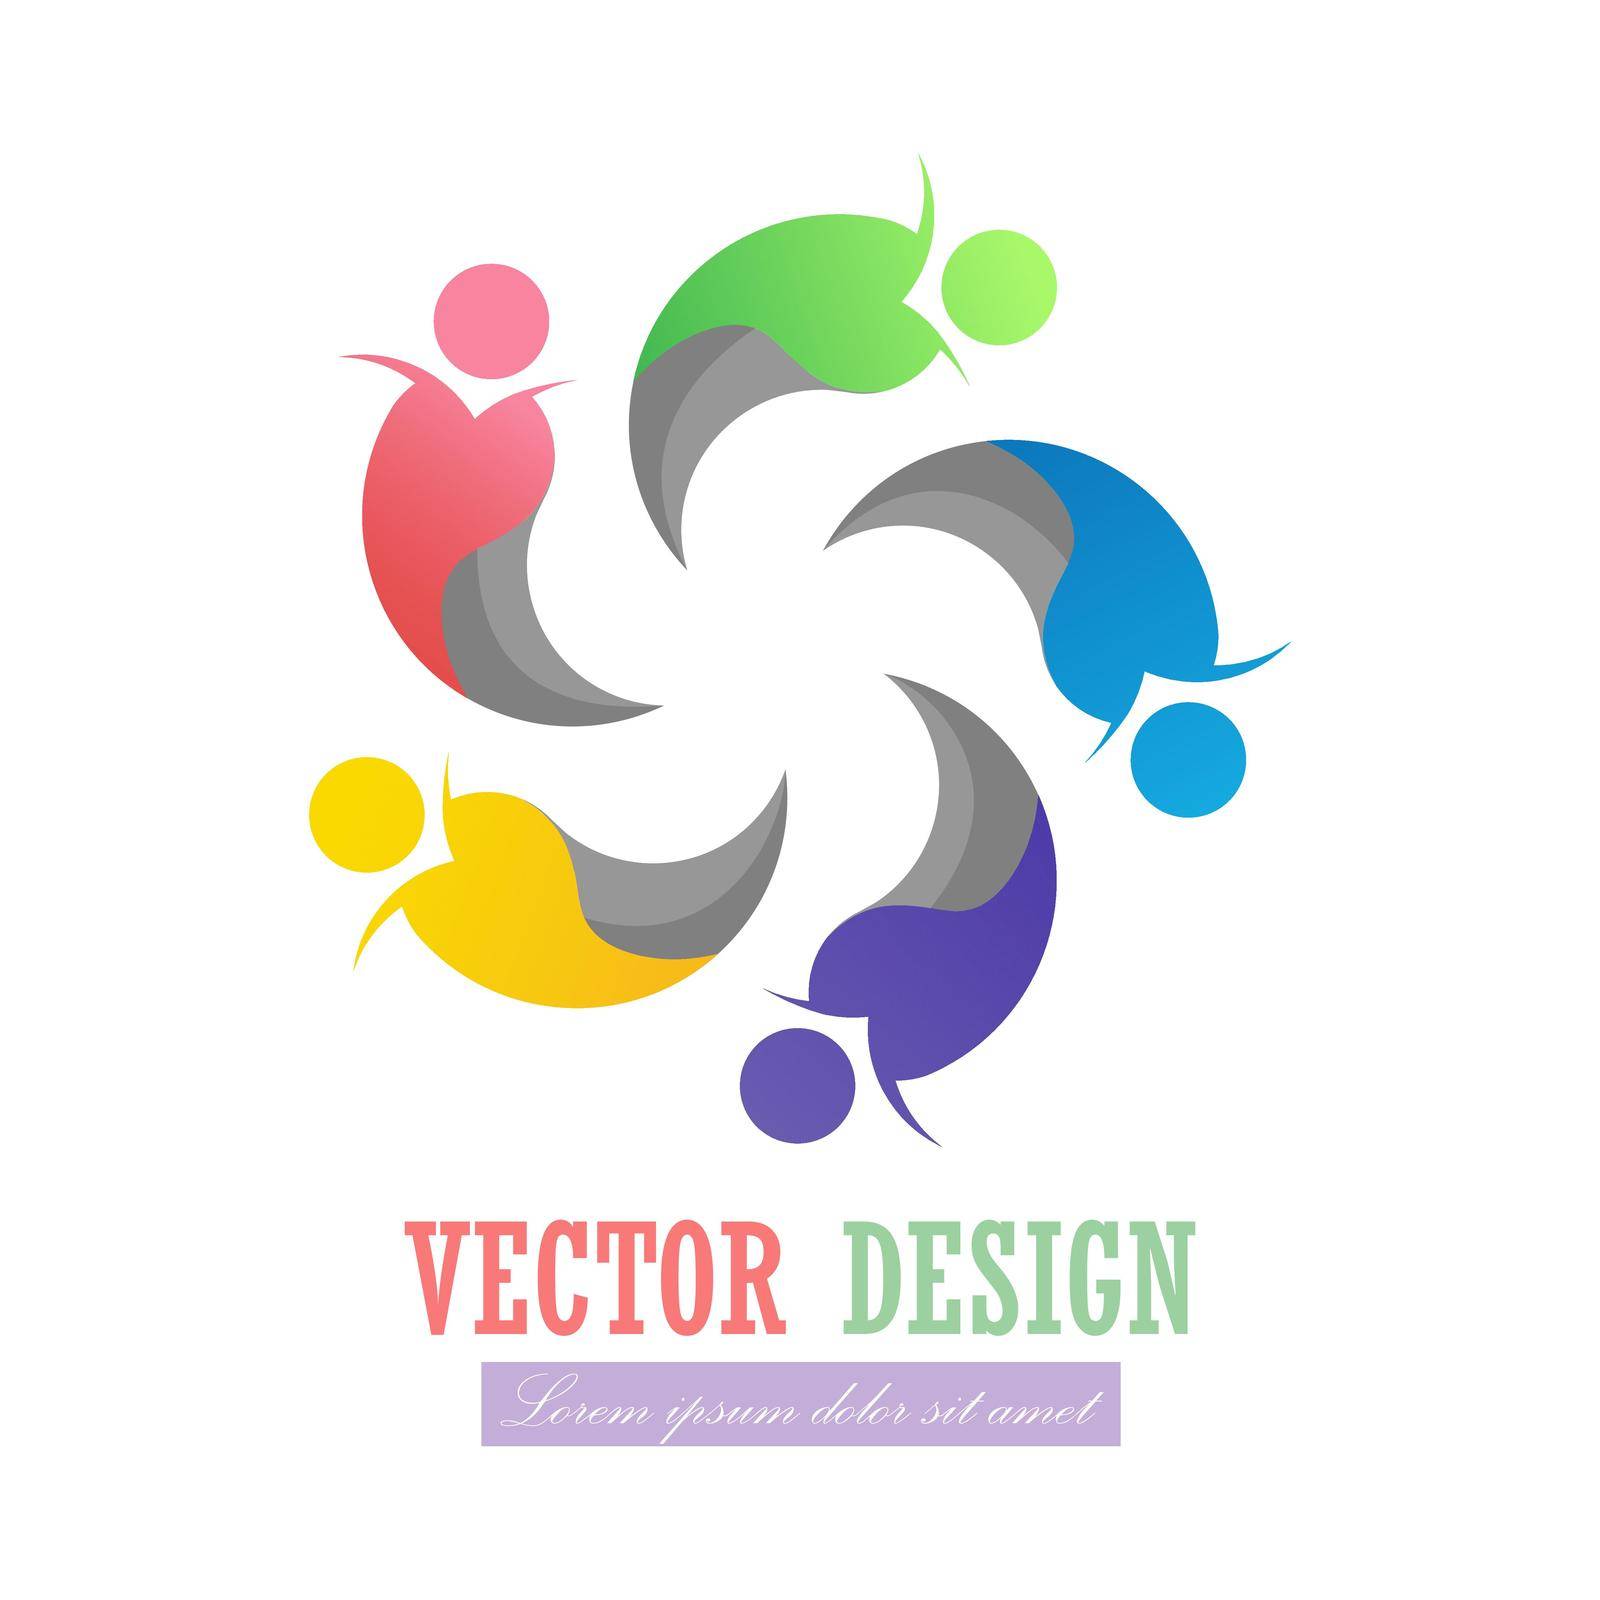 company's logo. Vector illustration for a logo, logo, brand or social project by Grommik